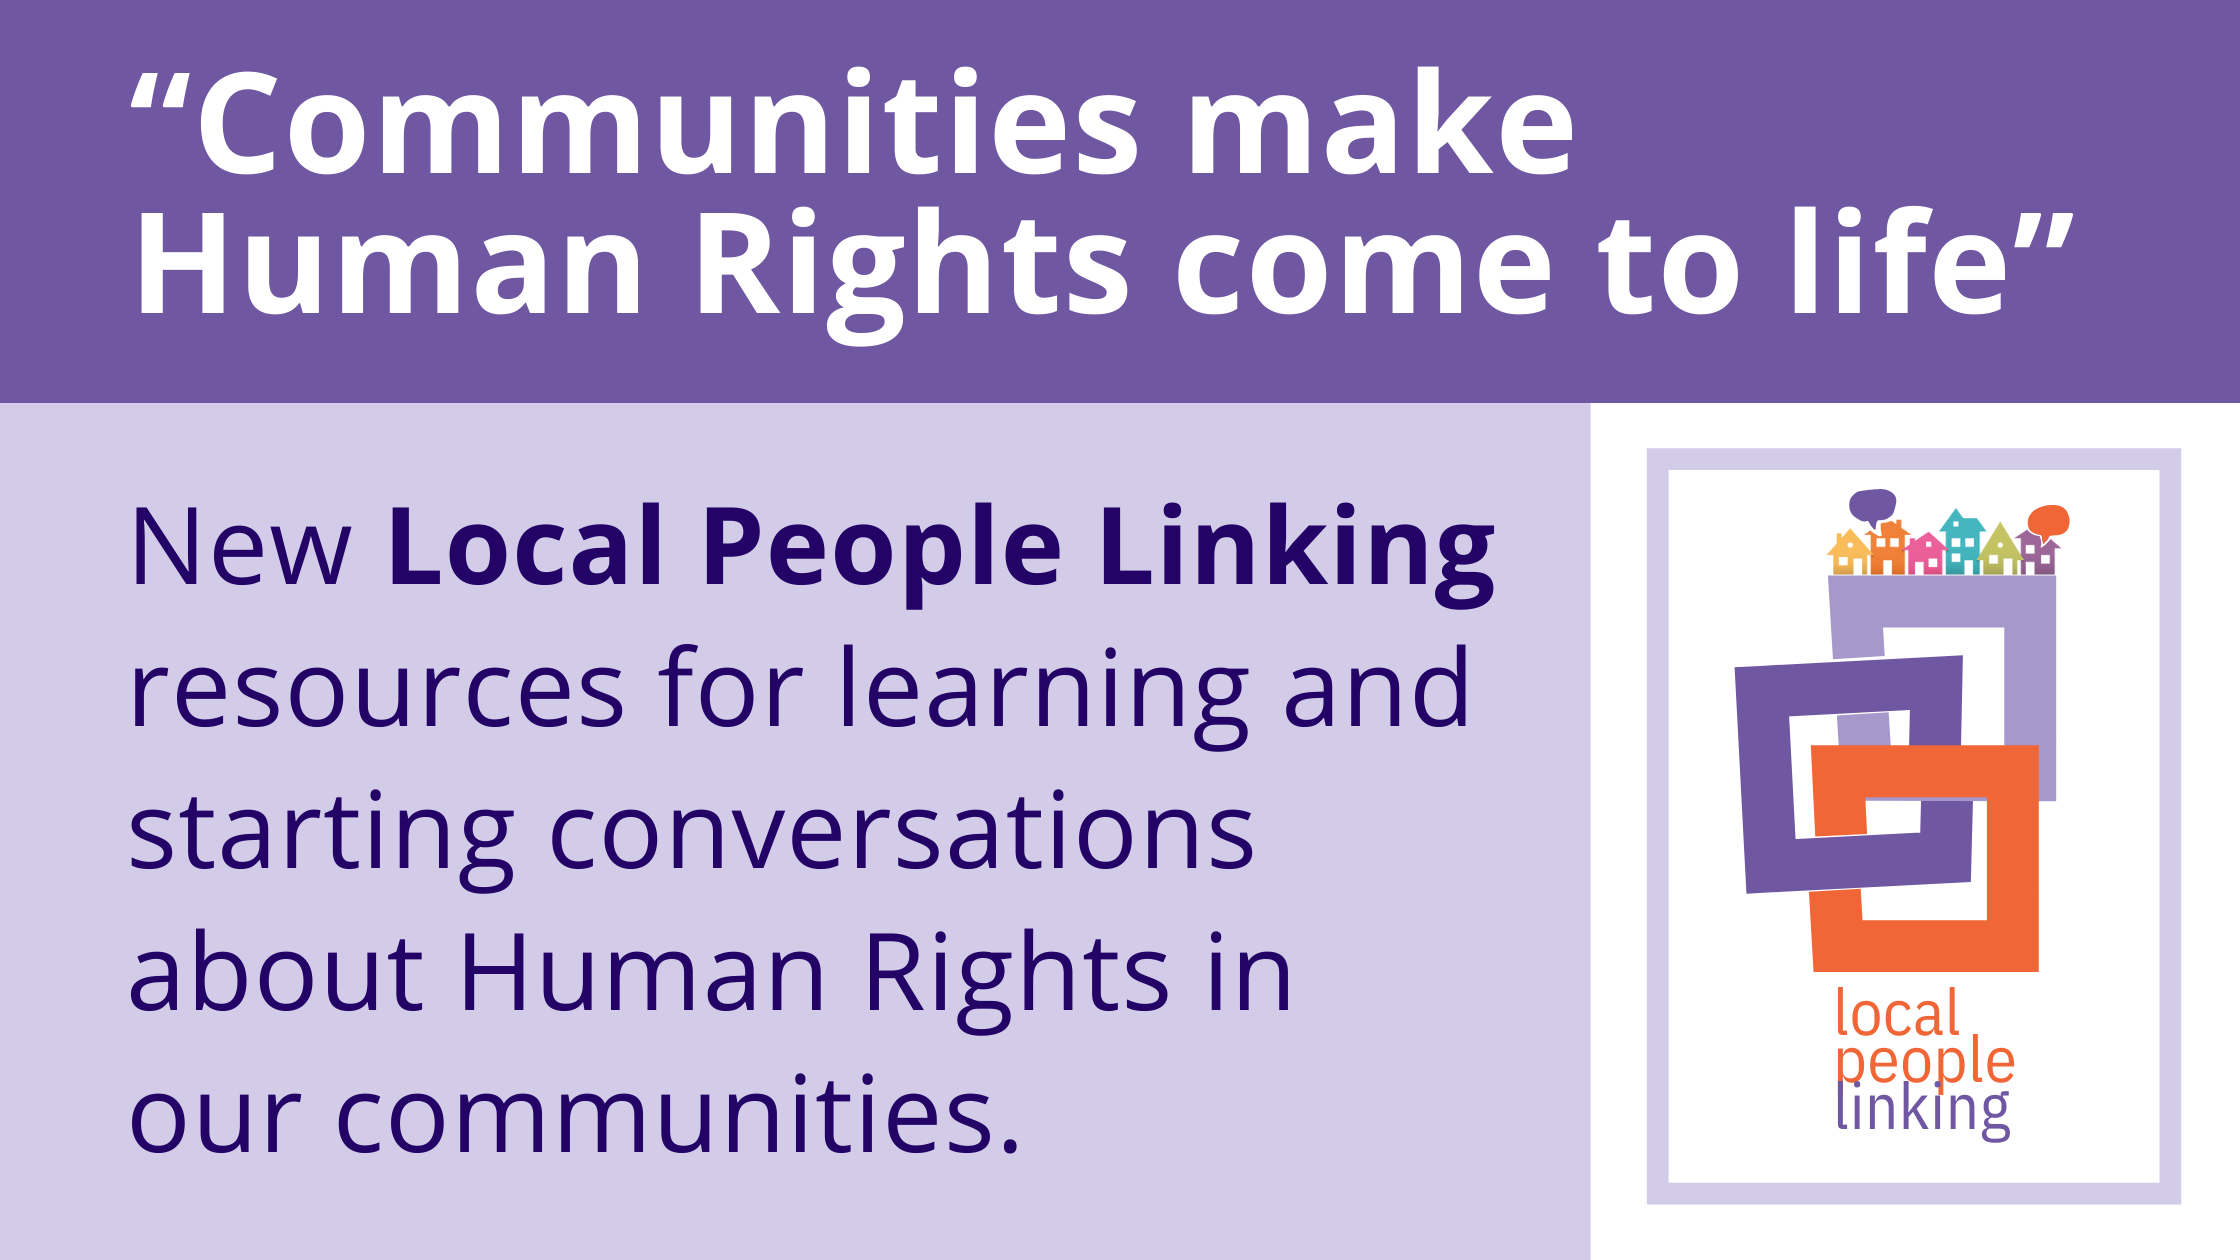 Communities make Human Rights come to life. New Local People Linking resources for learning and starting conversations about Human Rights in our communities.